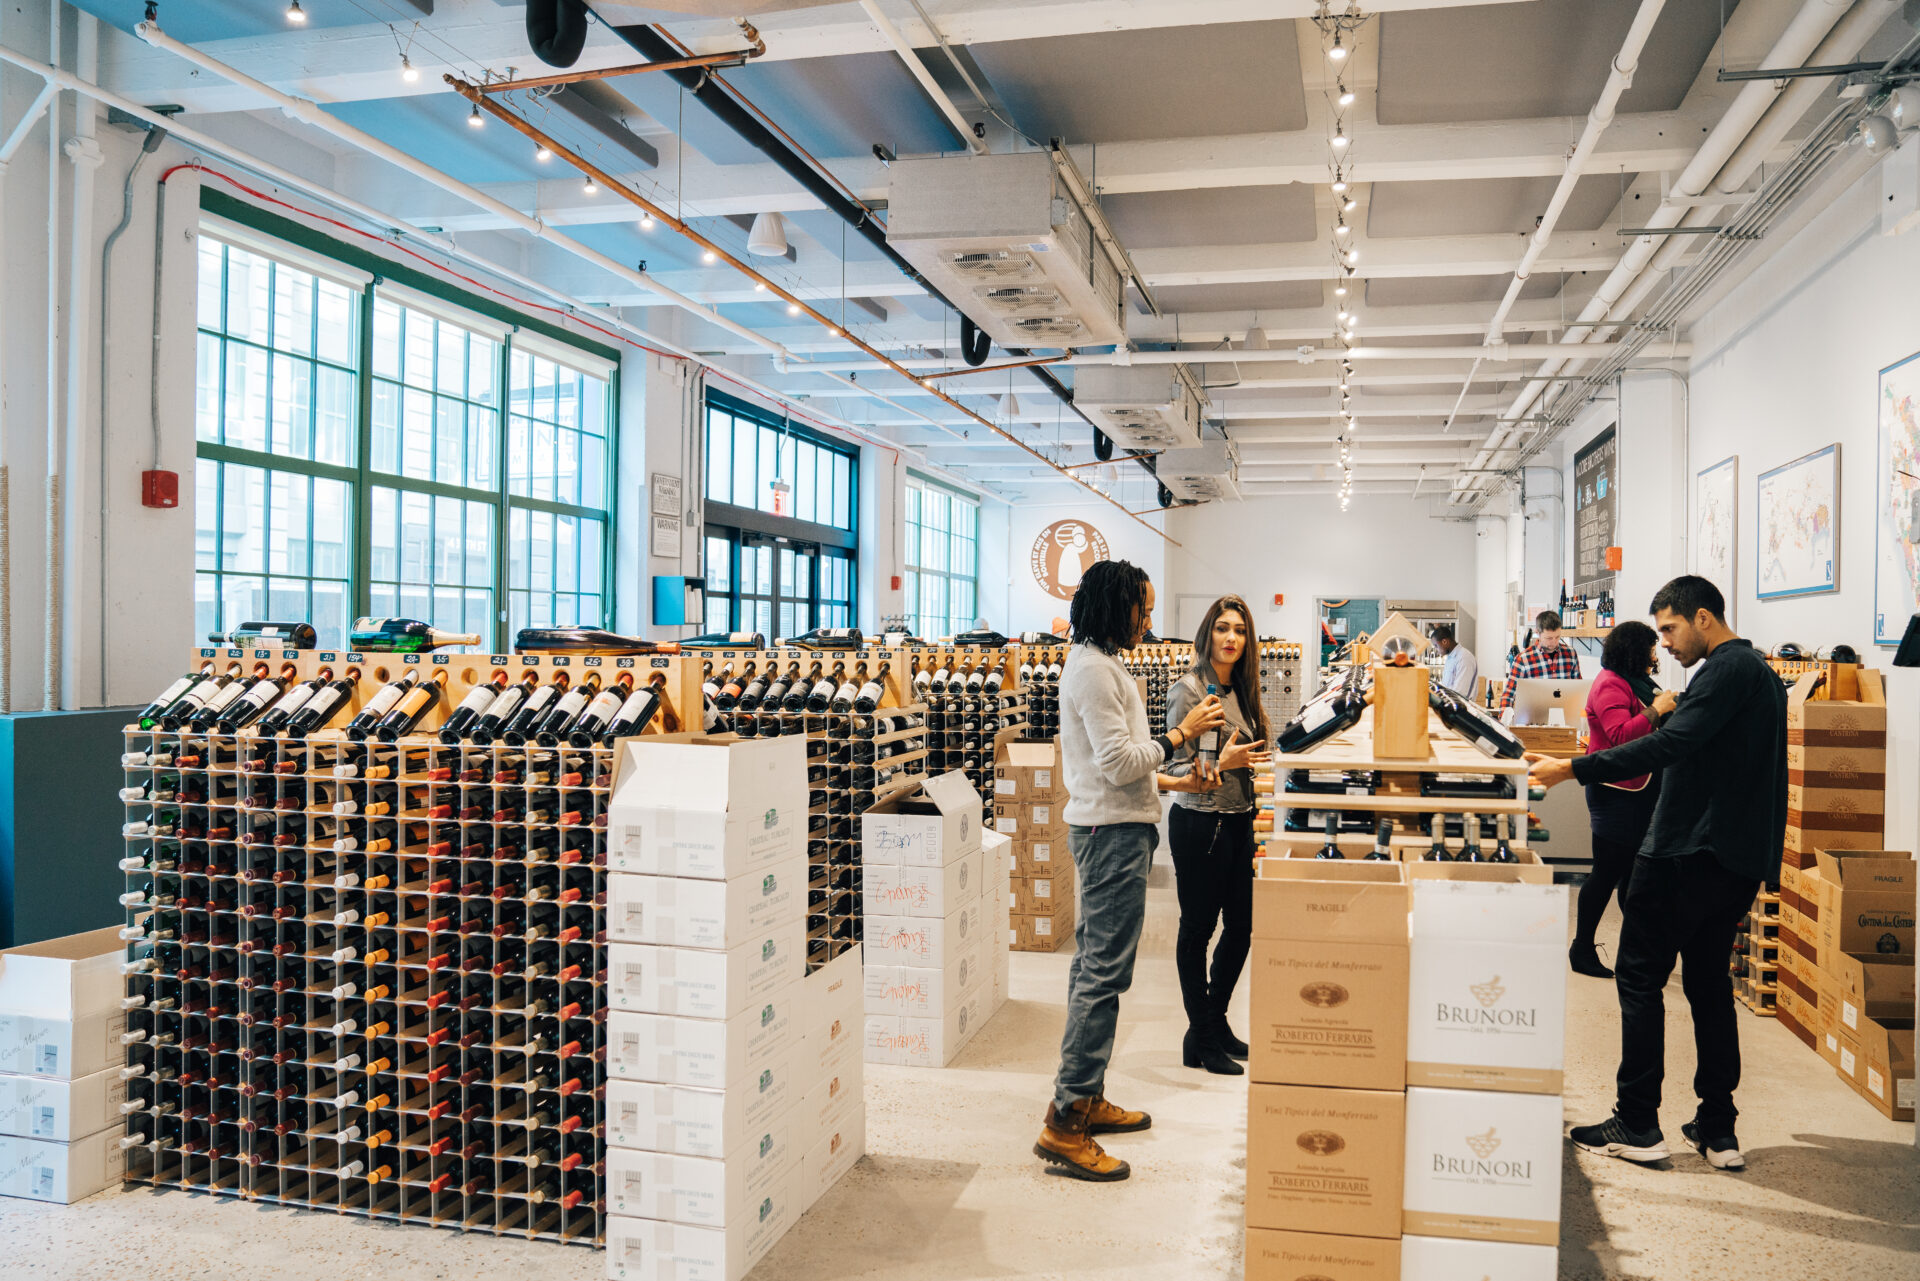 People are shopping for wine in a wine store.